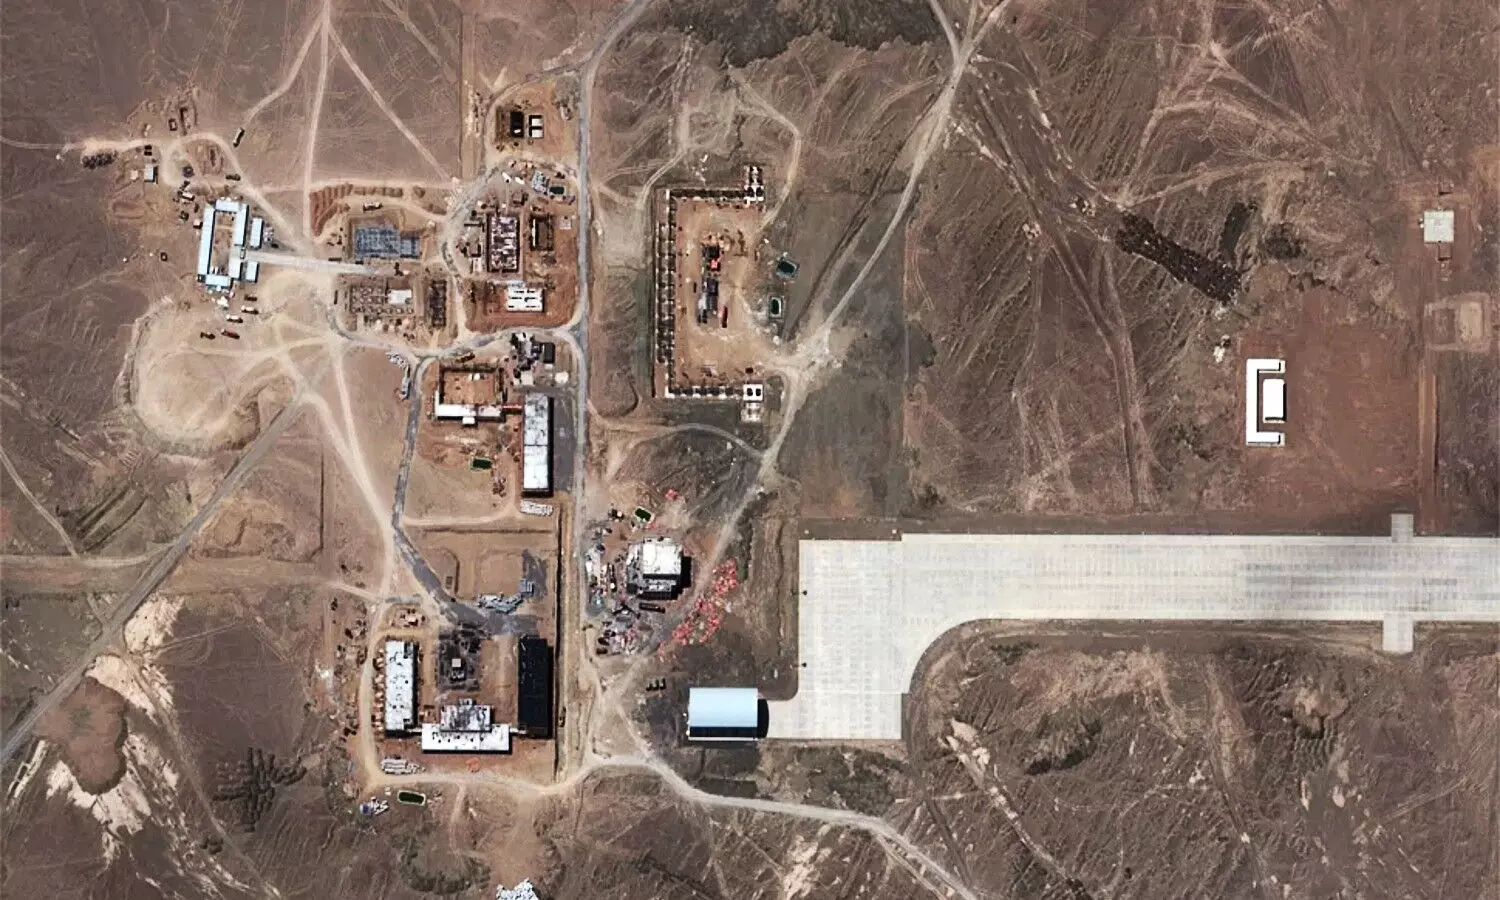 China is developing a secret airbase in Lop Nur, Xinjiang. This secret airbase has been named Area-51